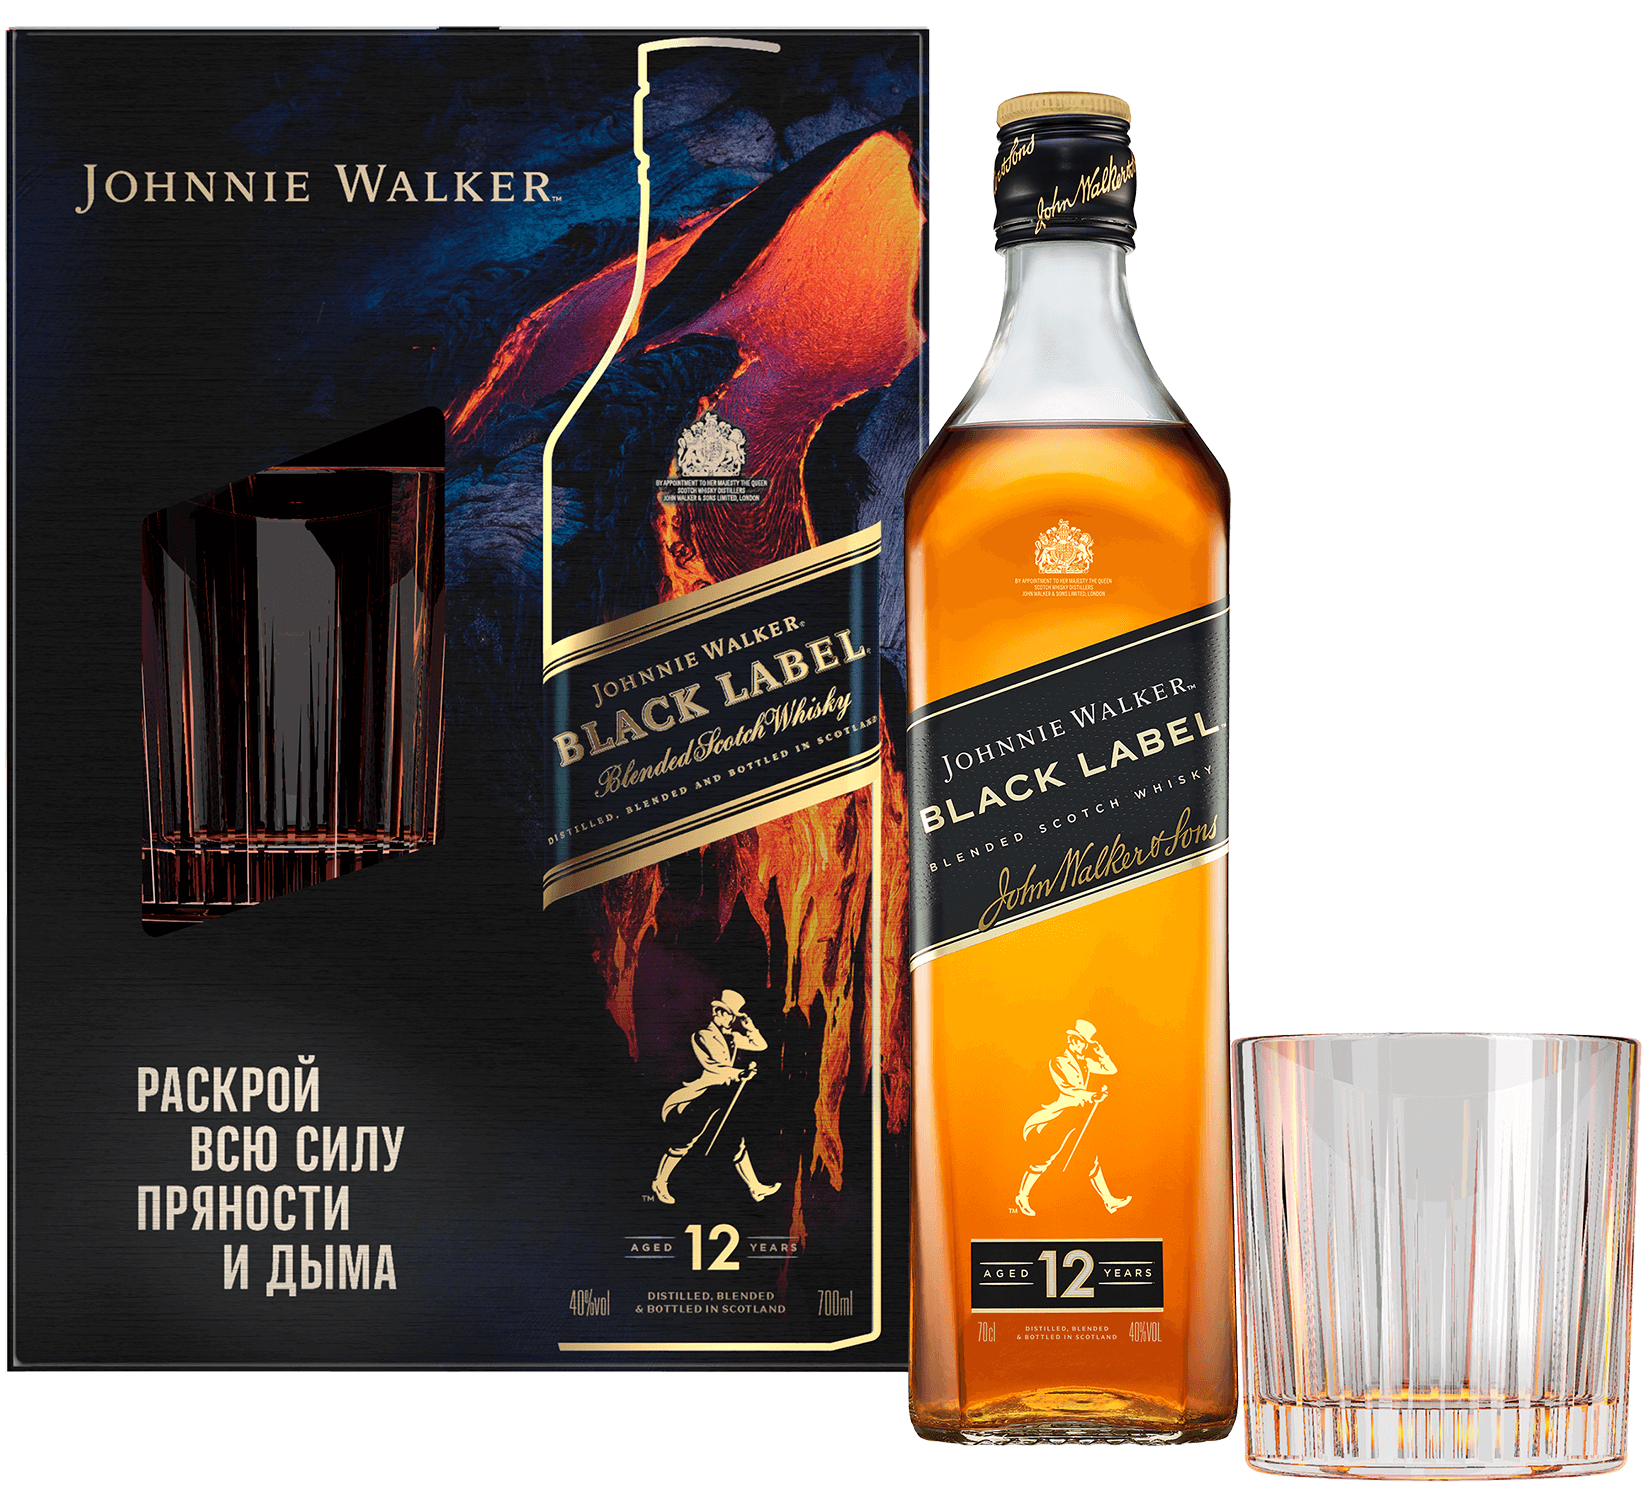 Johnnie Walker Black Label Blended Scotch Whisky (gift box with a glass) johnnie walker blue label blended scotch whisky gift box